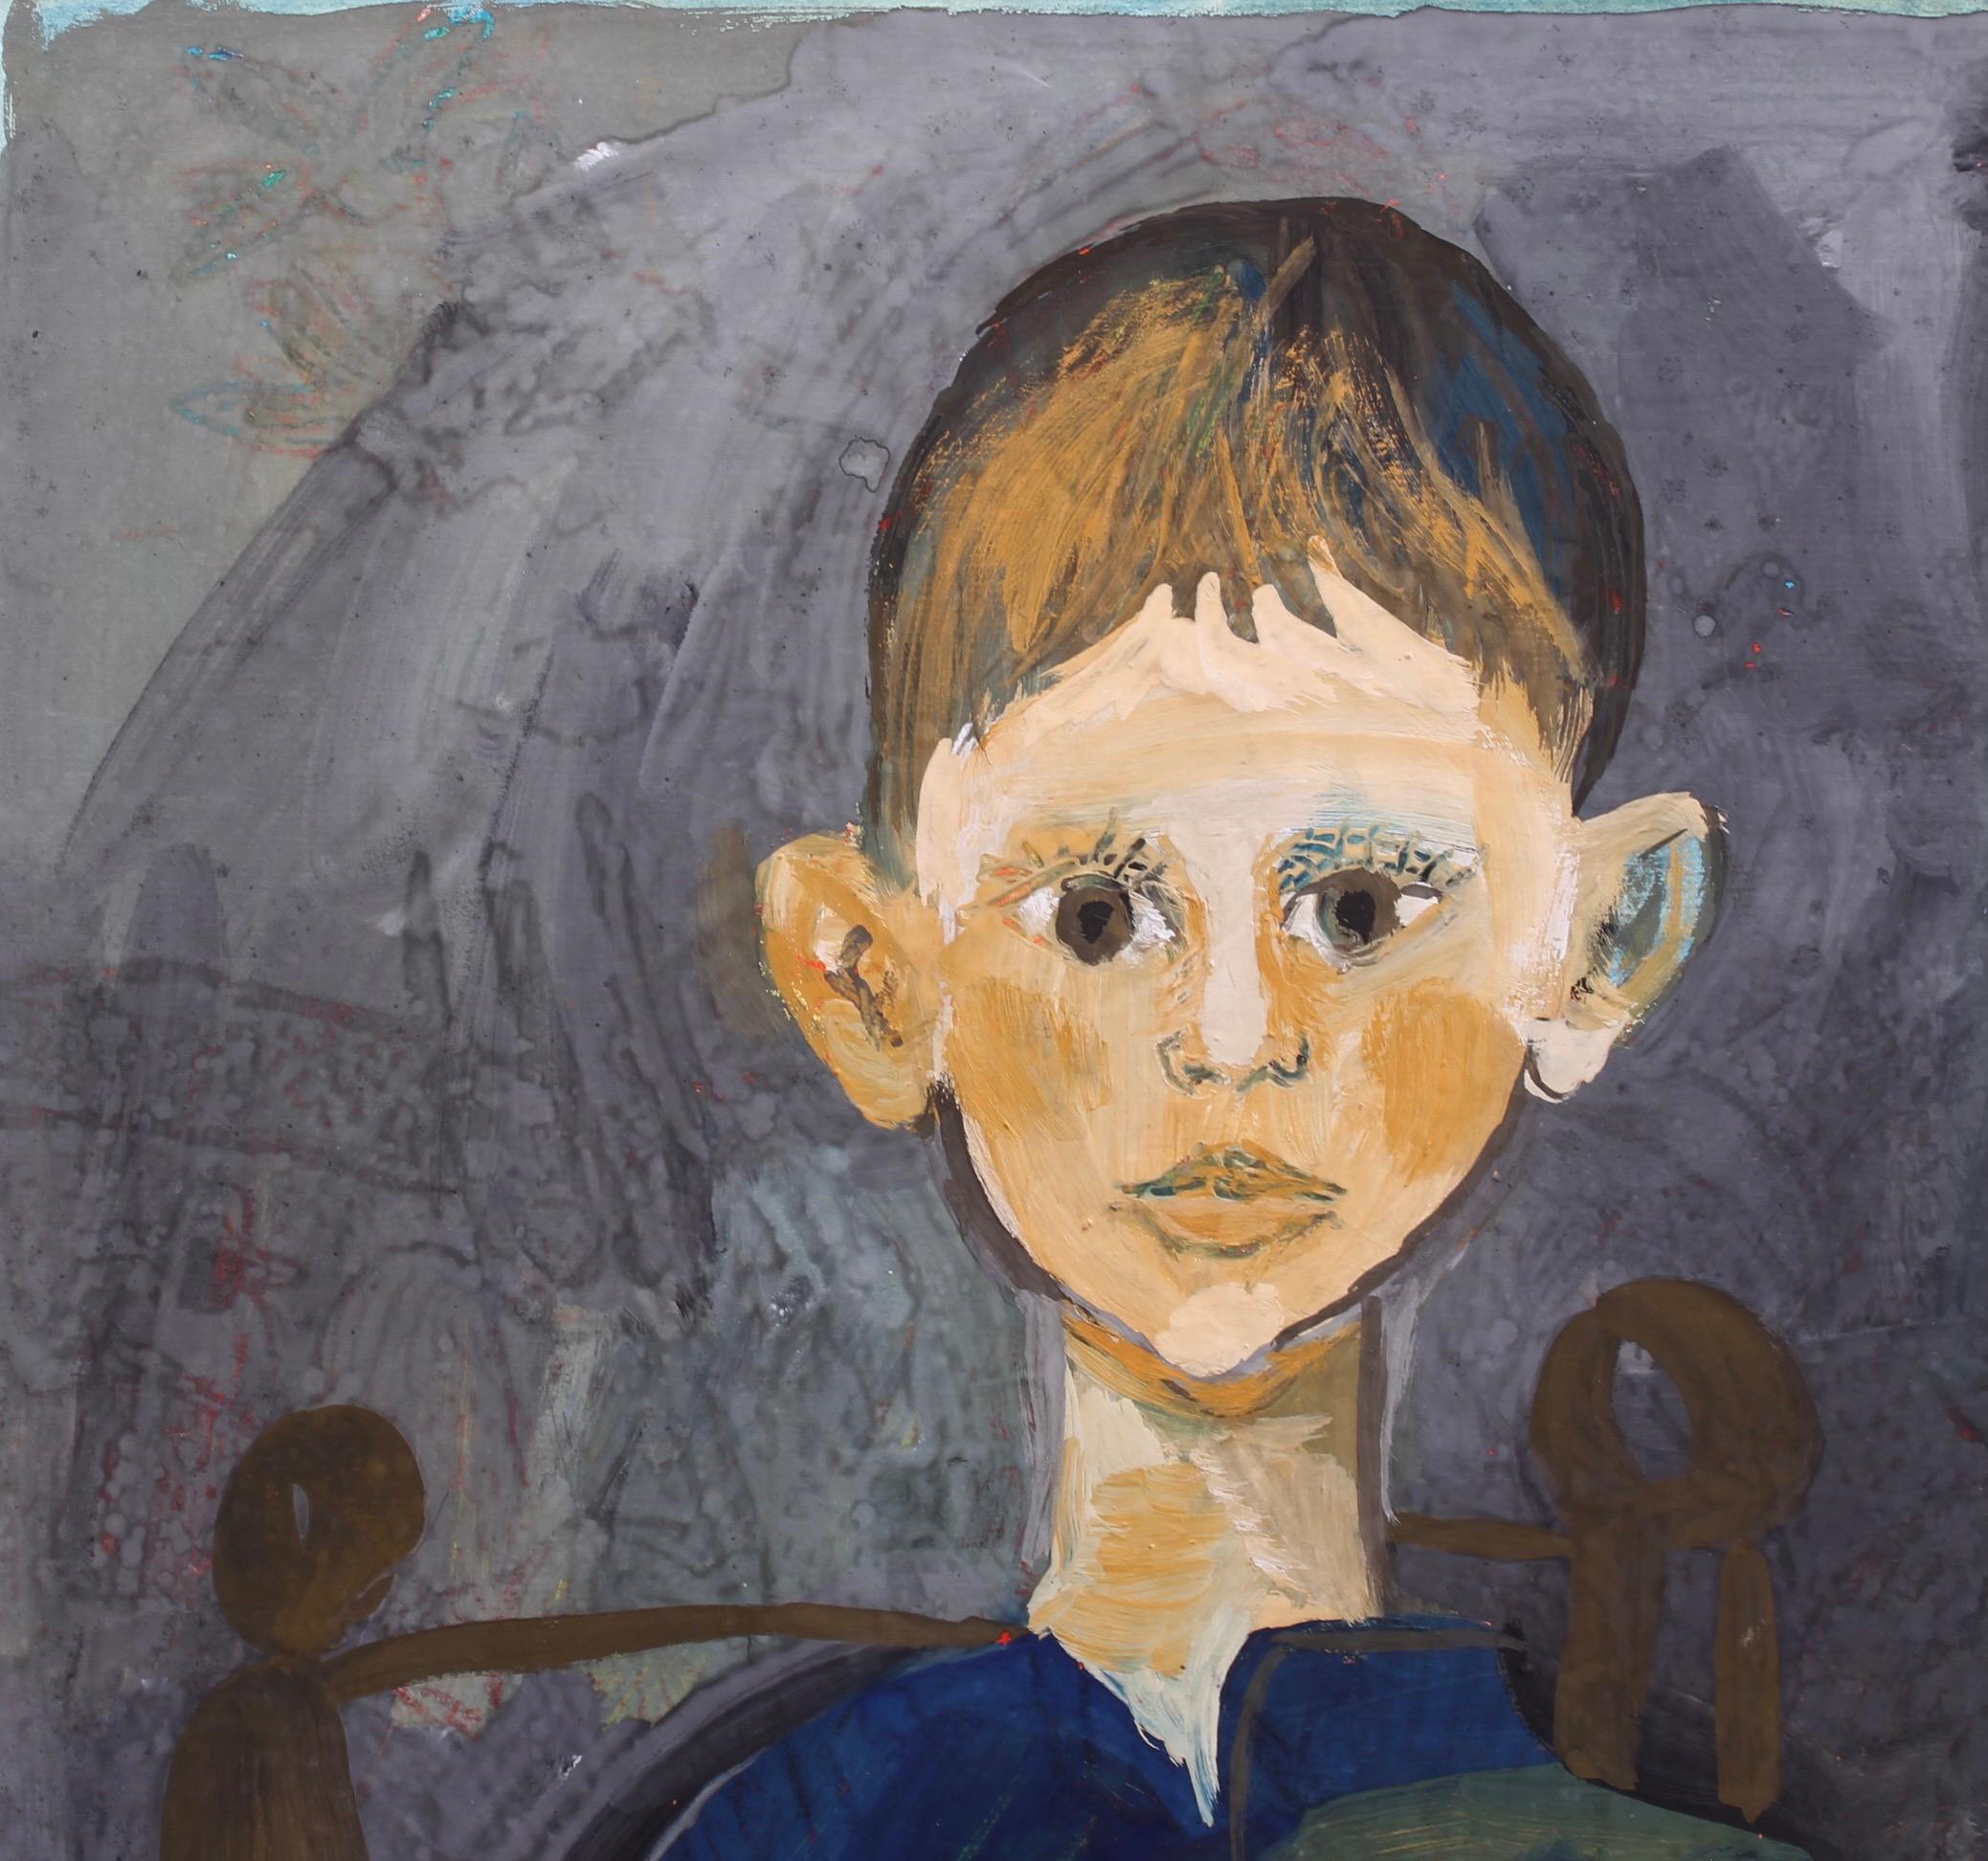 'Portrait of Boy in a Chair', gouache on art paper, by Raymond Debiève (circa 1960s). Here the artist paints a young boy, very probably his son, Vincent, sitting in a chair posing for the artist. In Debiève's artistic style, Picasso's influence is